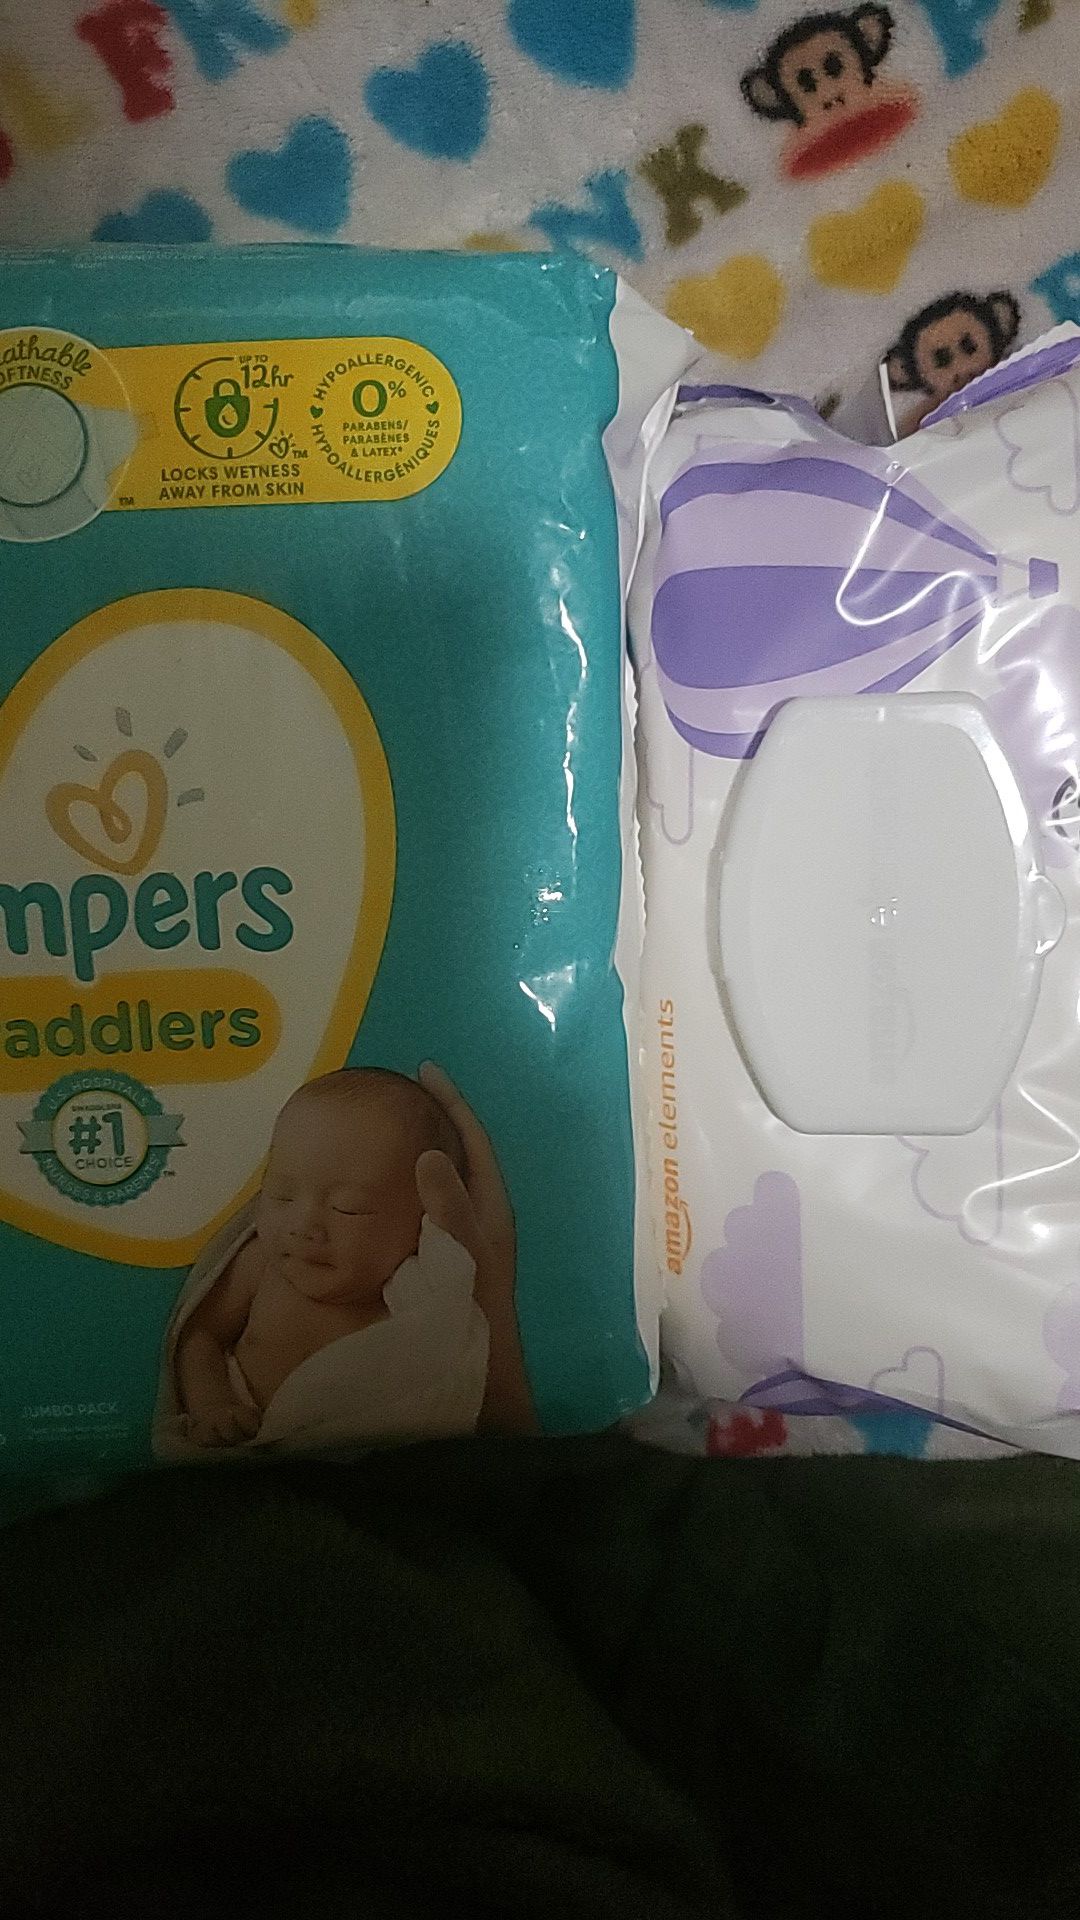 Diapers and wipes